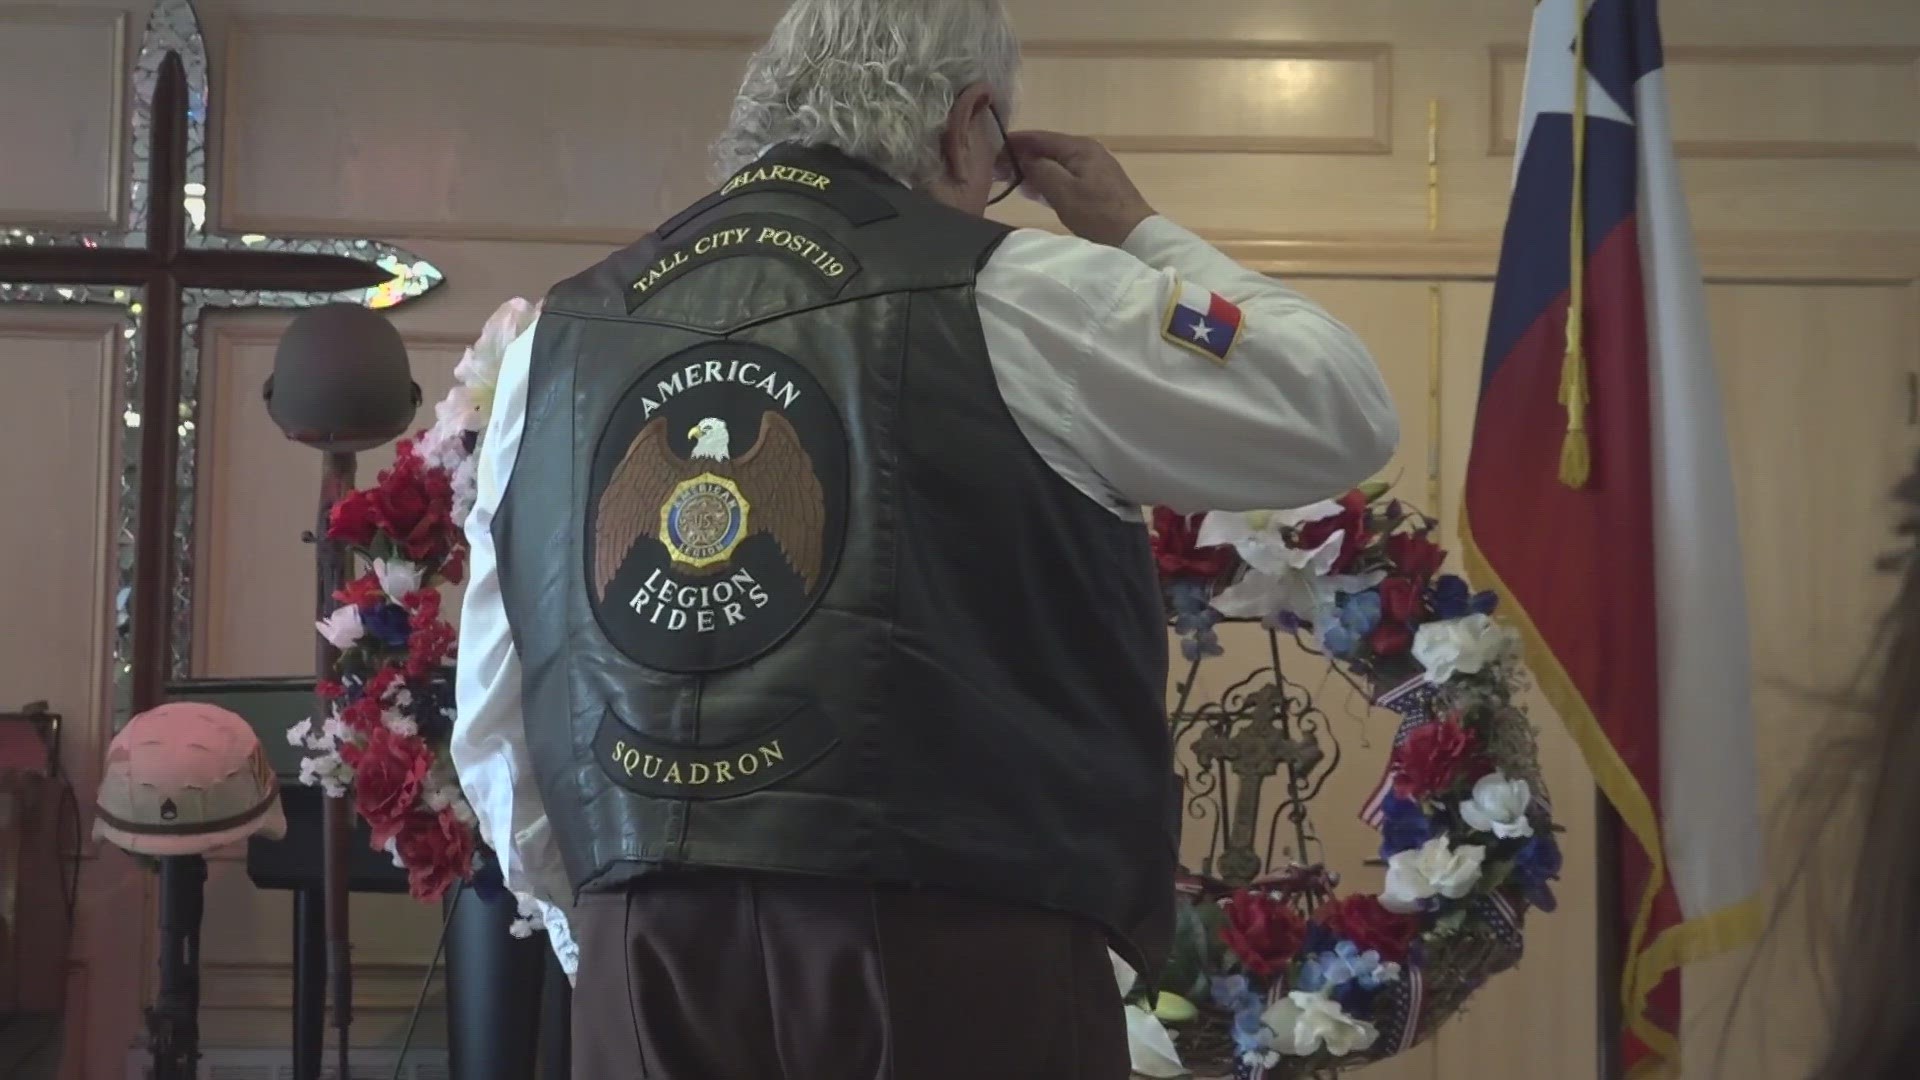 The event gave West Texans a chance to pay their respects to fallen servicemembers.